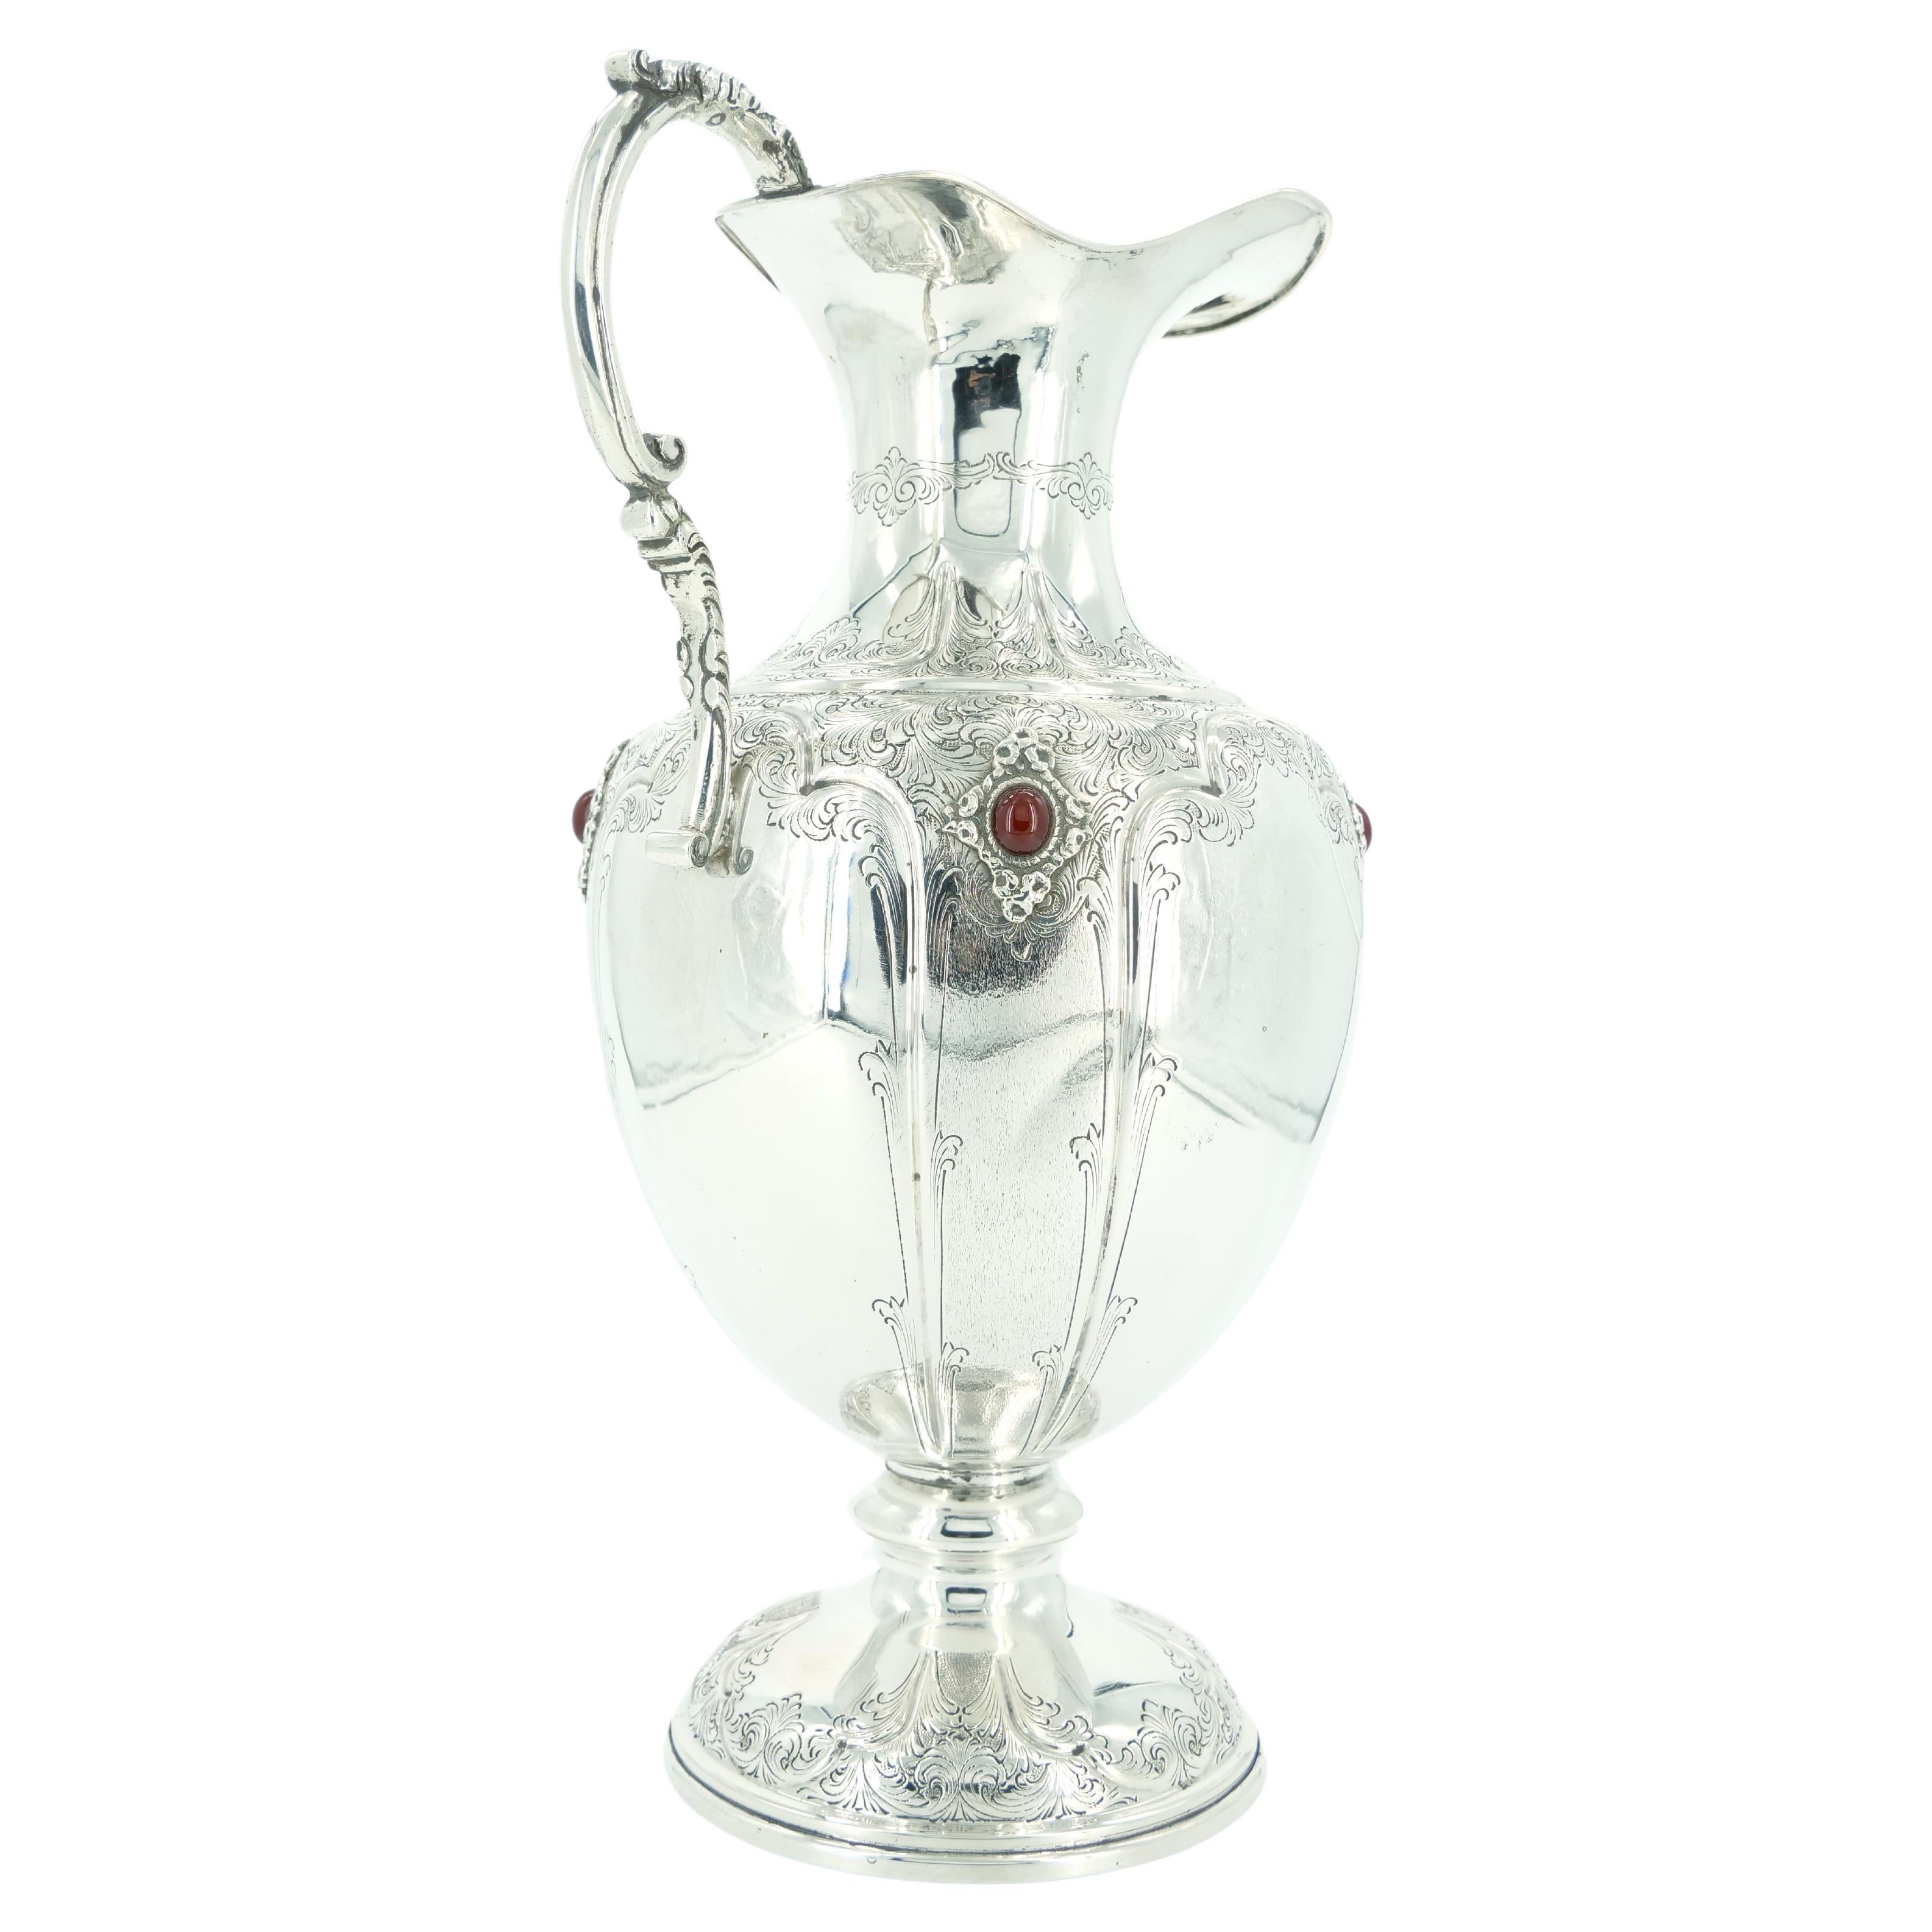 Italian Sterling Silver / Precious Stone One Handled Decorative Vase / Piece For Sale 13